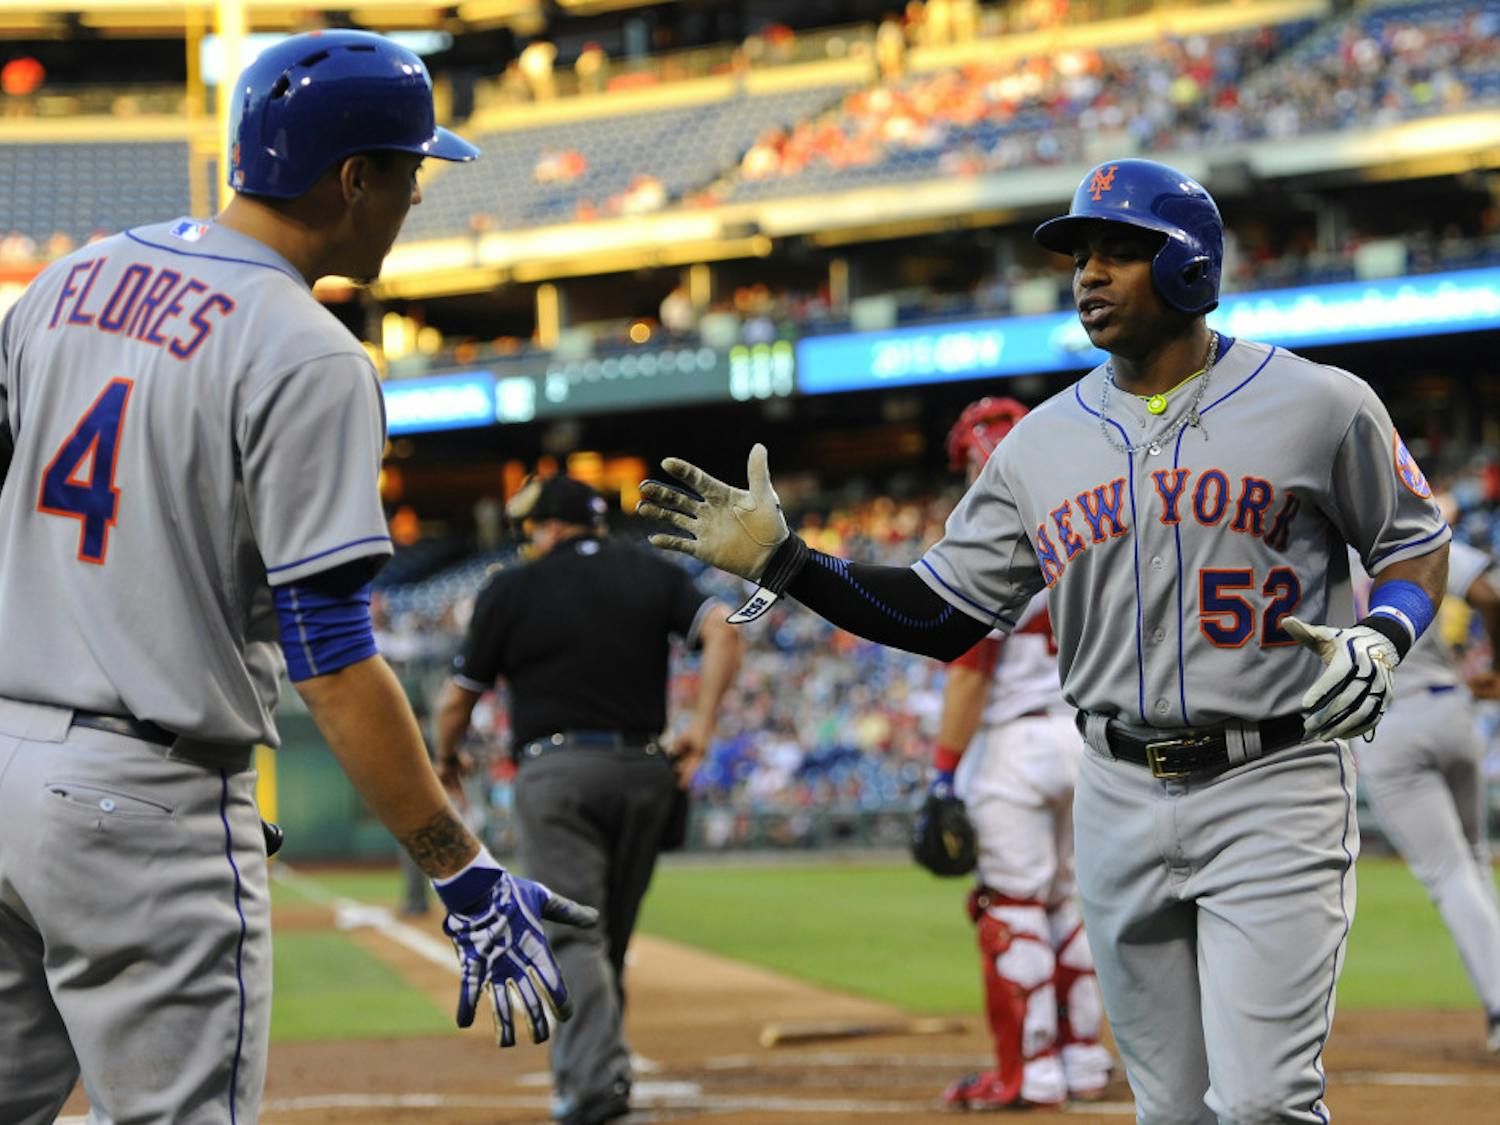 New York Mets' Yoenis Cespedes (52) celebrates with teammate Wilmer Flores after scoring a run on a Michael Cuddyer double in the first inning of a baseball game against the Philadelphia Phillies, Wednesday, Aug. 26, 2015, in Philadelphia. (AP Photo/Michael Perez)